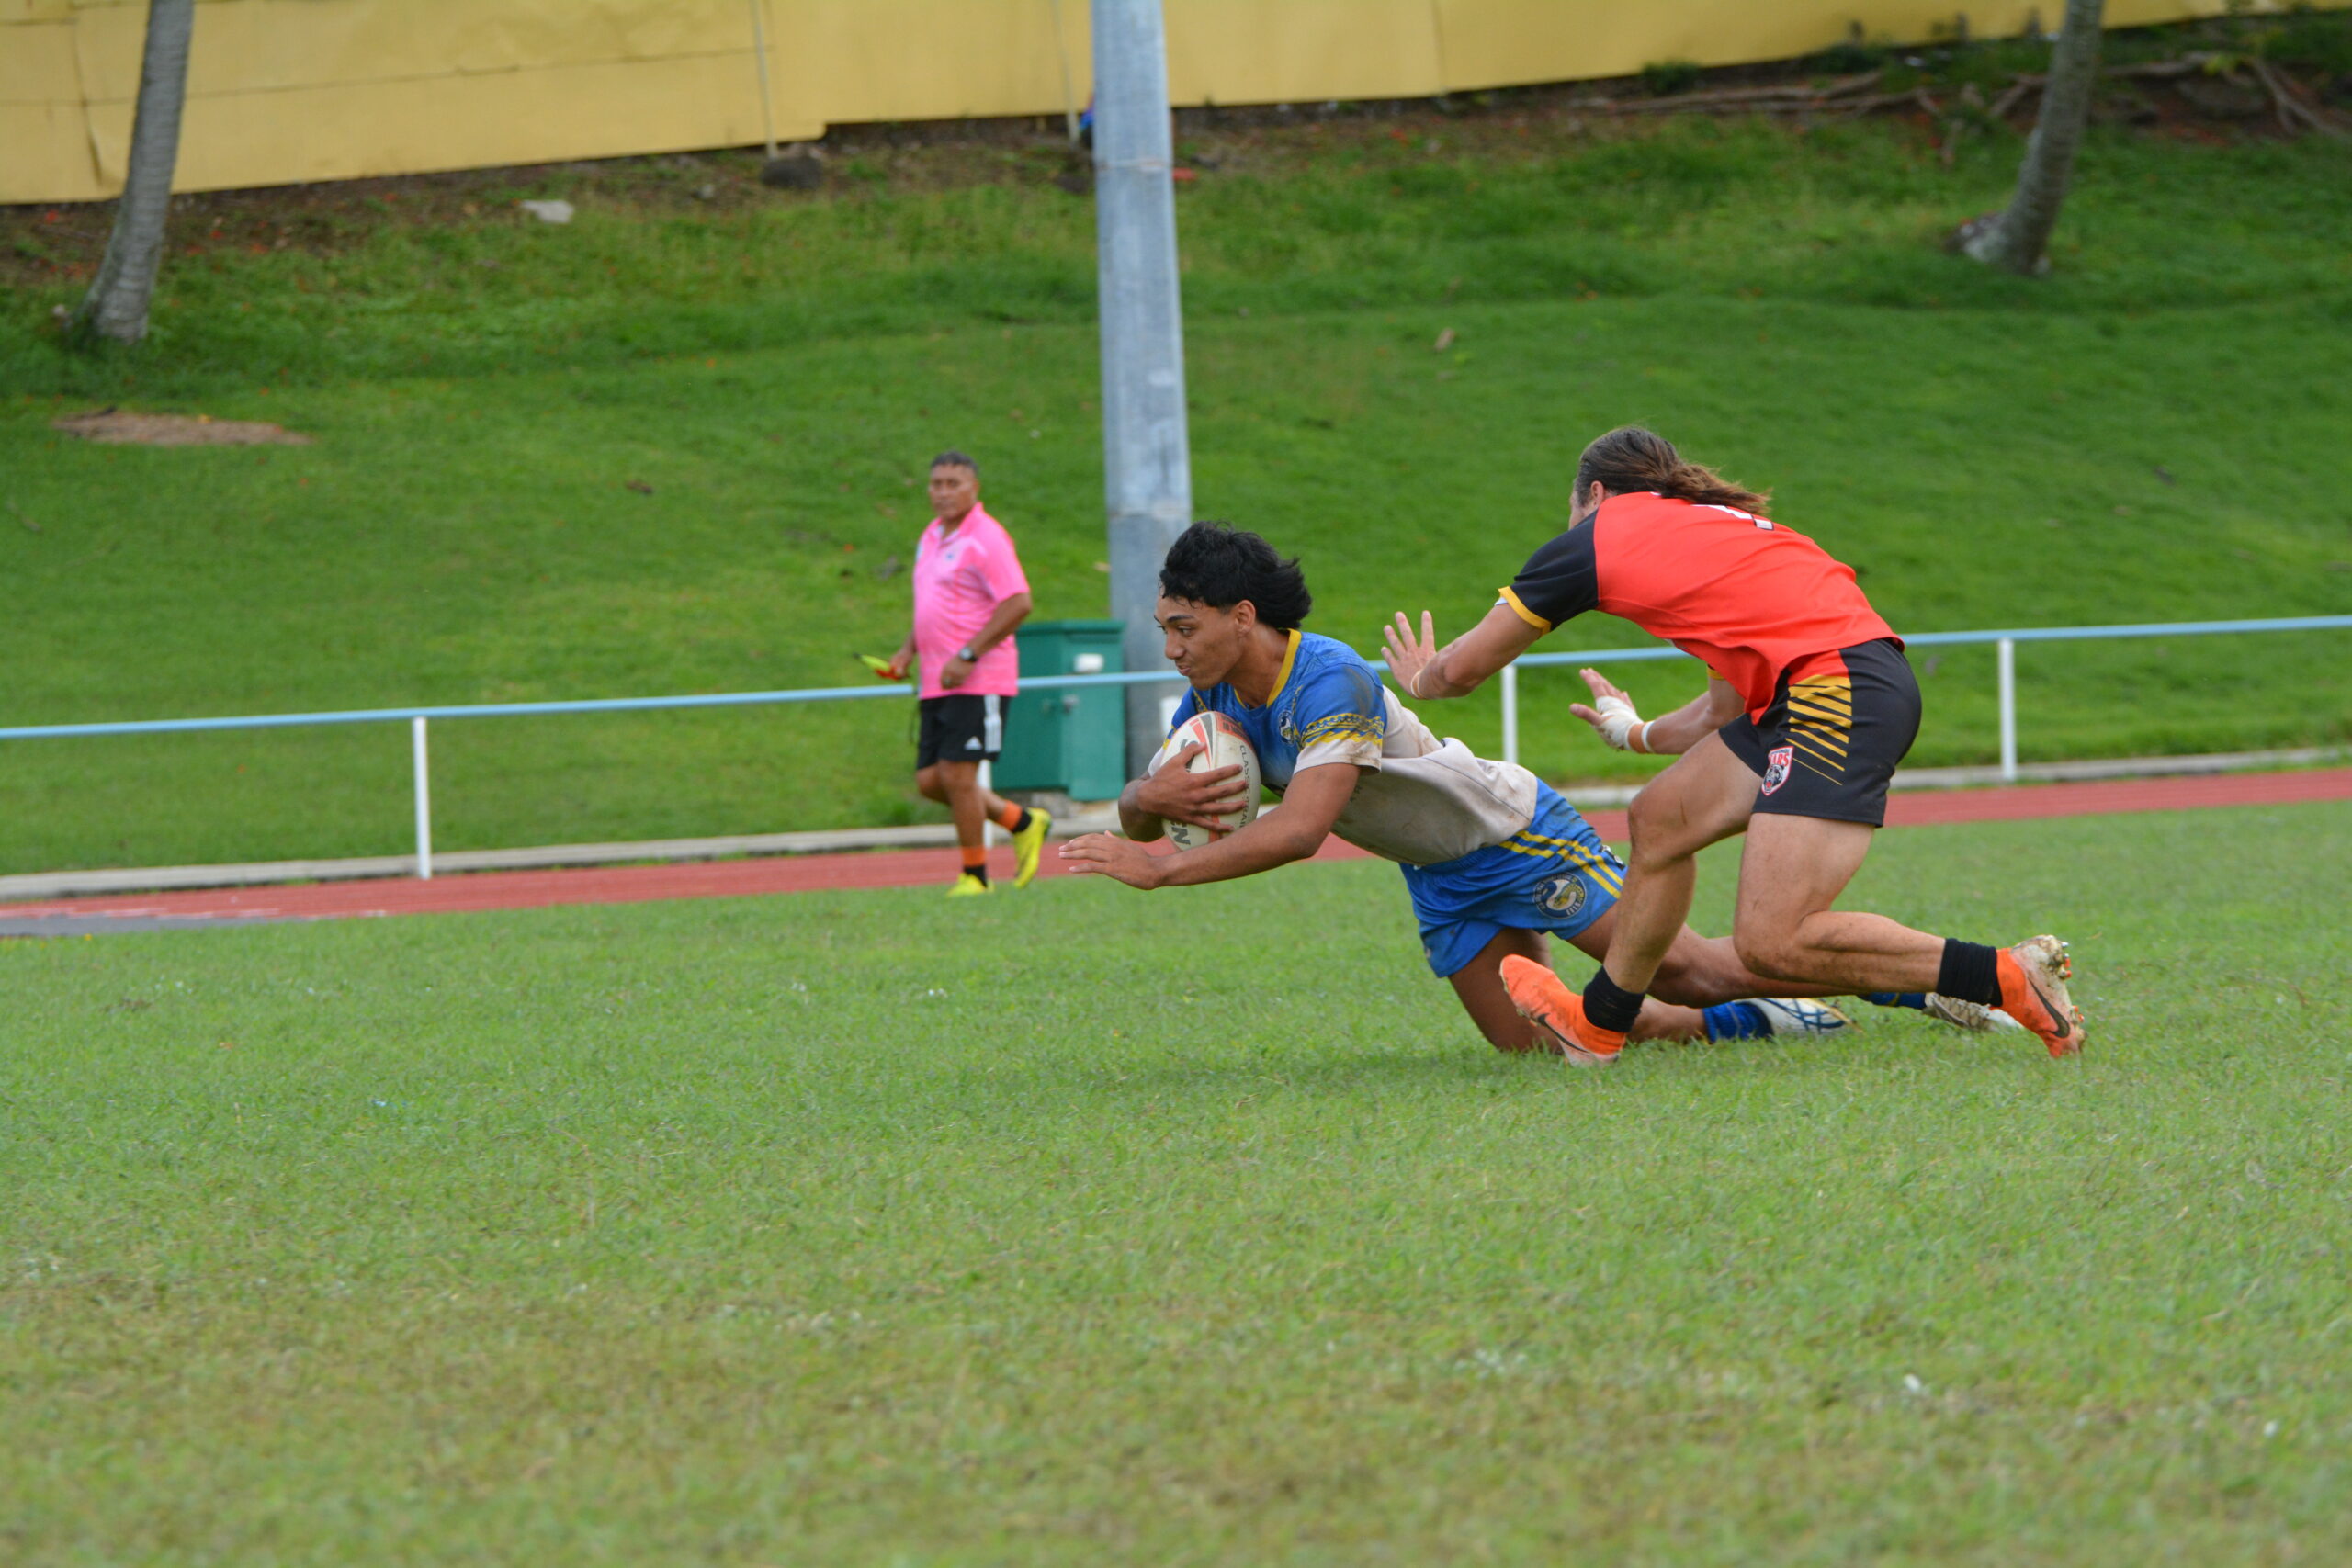 New champs crowned at League Nines in Paradise